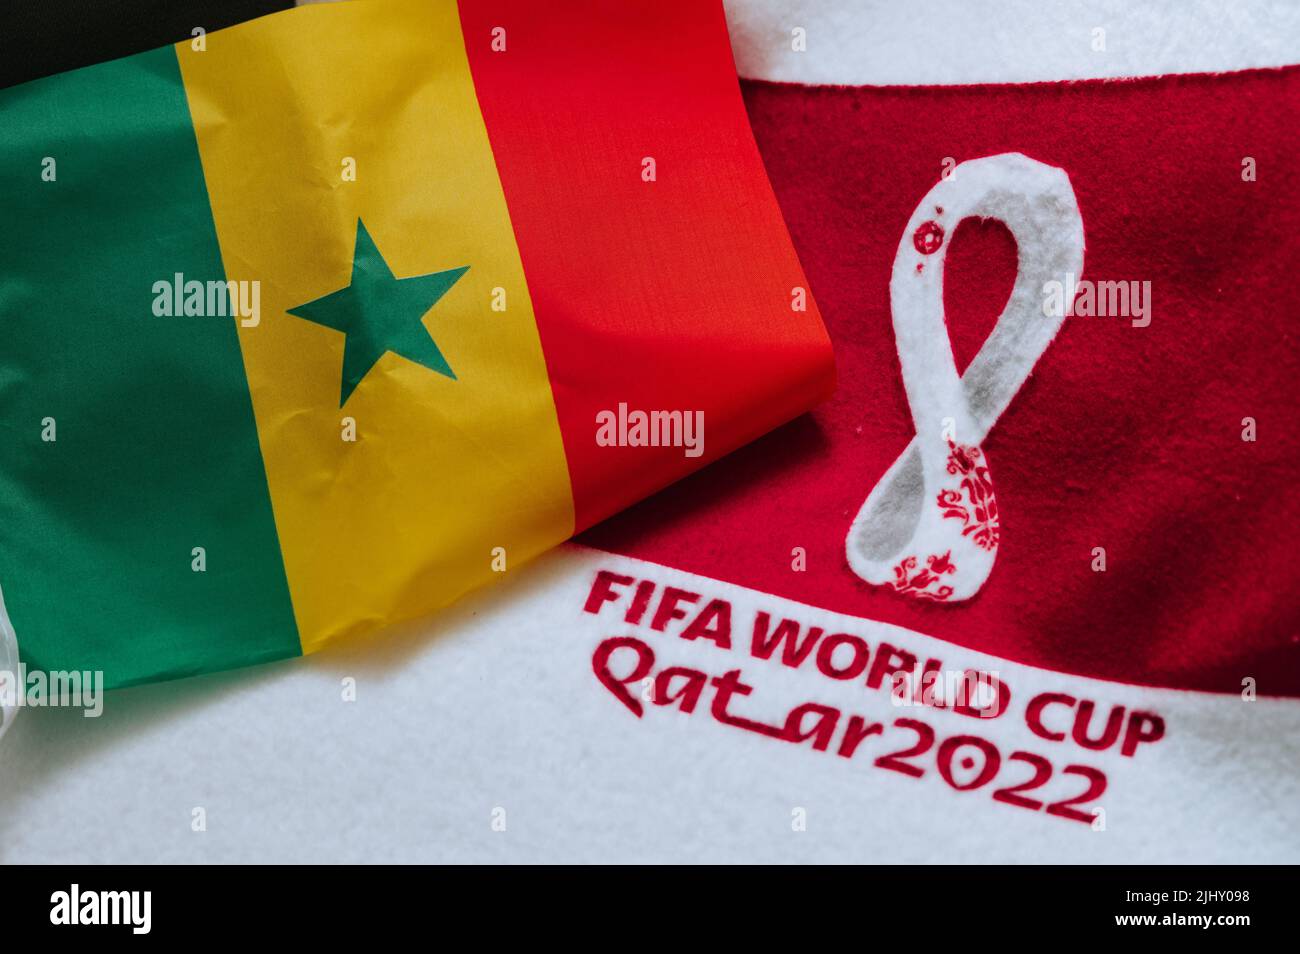 QATAR, DOHA, 18 JULY, 2022: Senegal National flag and logo of FIFA World Cup in Qatar 2022 on red carpet. Soccer sport background, edit space. Qatar 2 Stock Photo